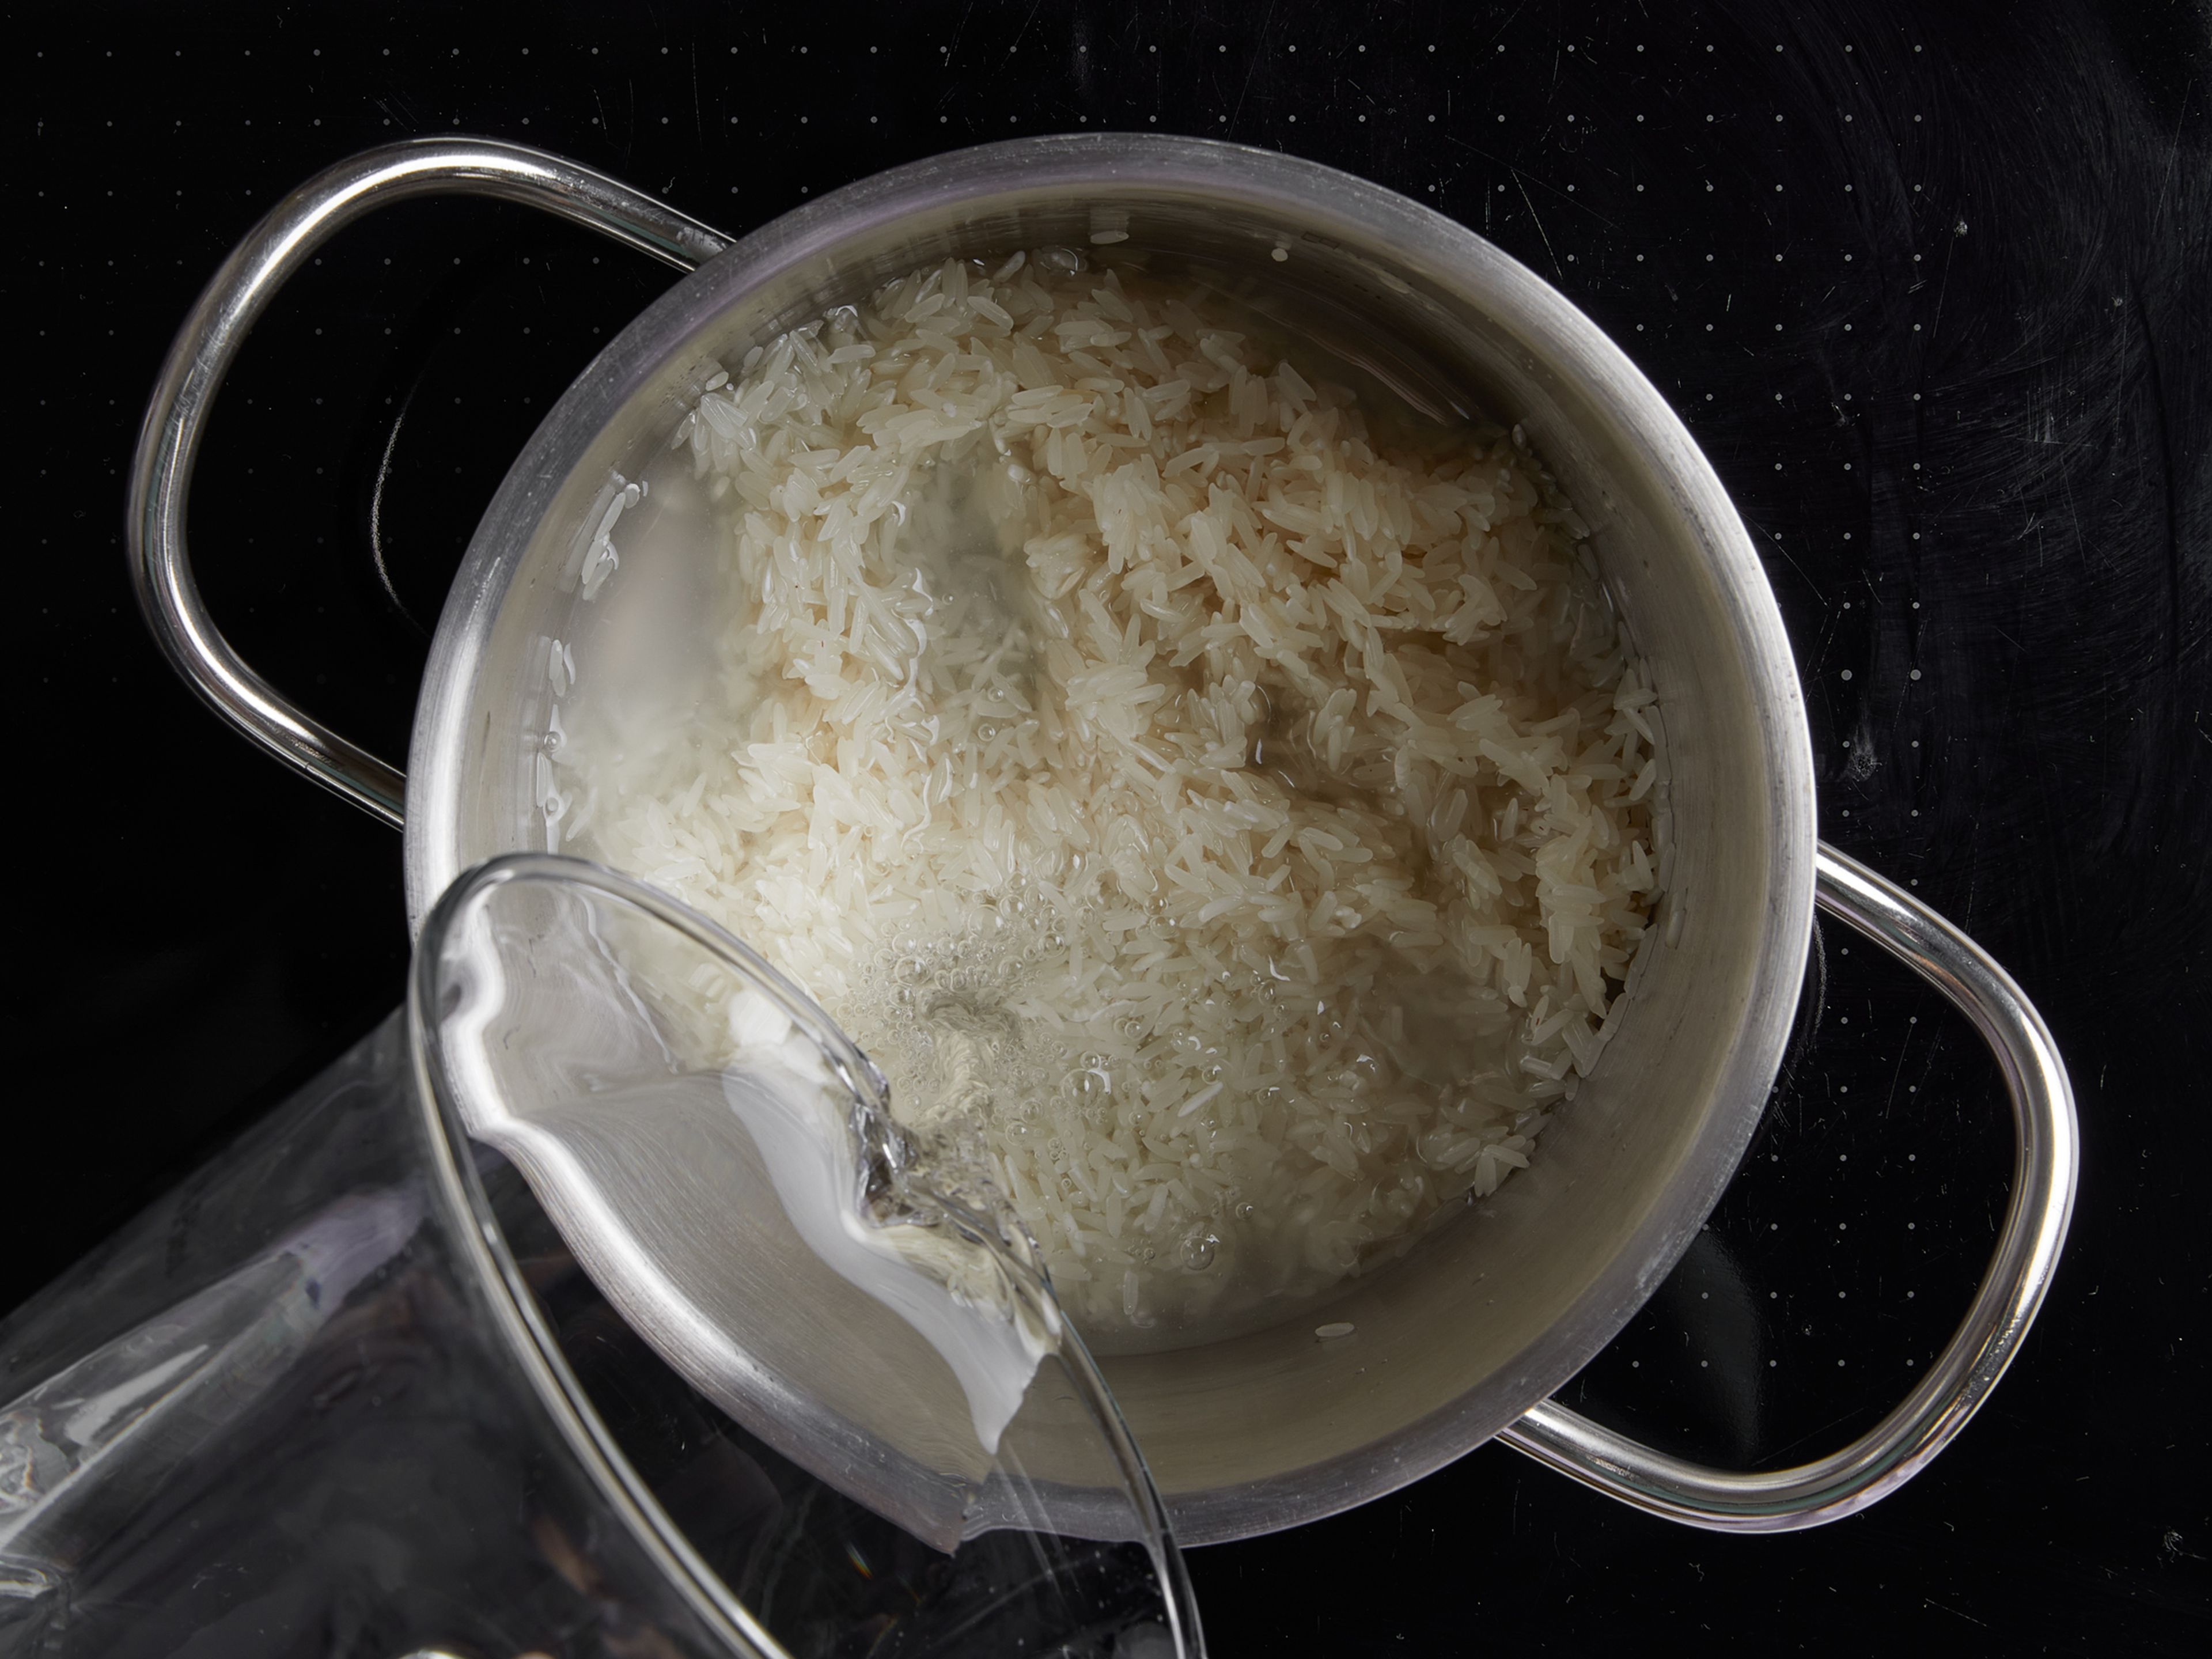 Wash and rinse the rice in a fine sieve until the water runs clear, then transfer to a pot with a lid. Add water, cover with a lid, and bring to a boil. Once boiling, reduce heat to low and cook for approx. 10 min. After the cooking time, remove from heat, keeping covered, and set aside.